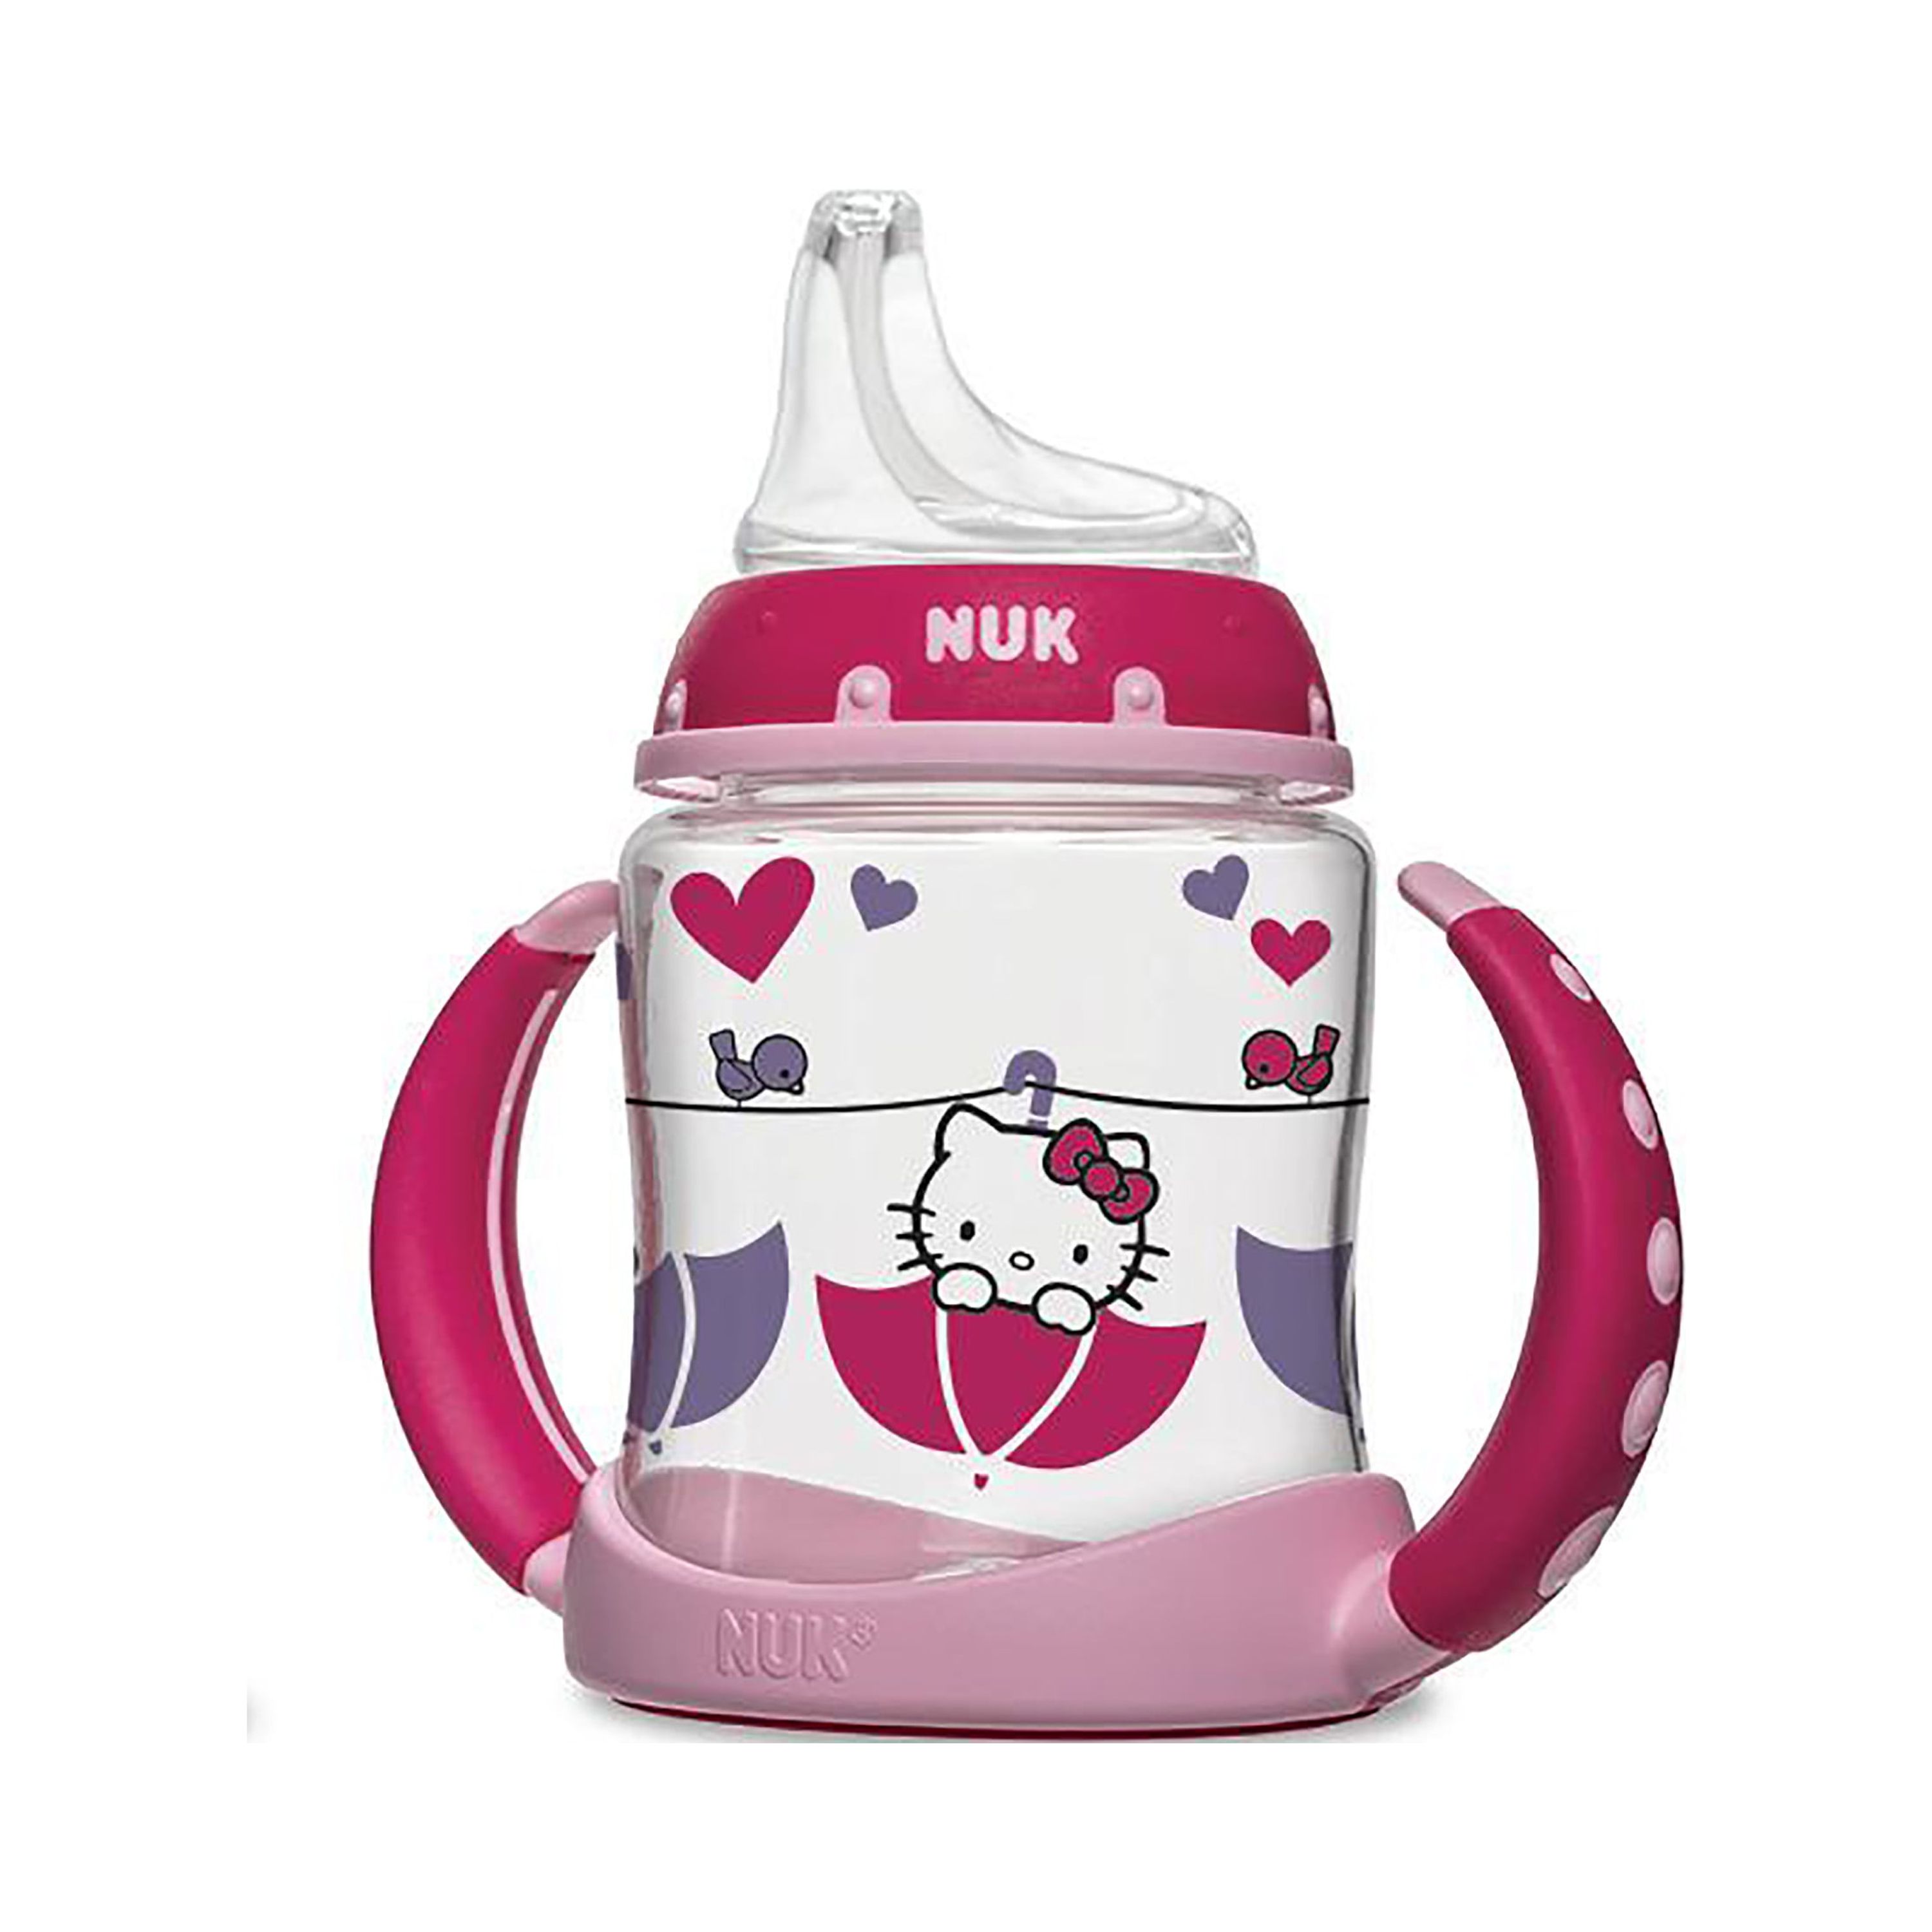 NUK Hello Kitty Learner Cup, 5 oz Soft Spout Sippy Cup, 1 Pack, 6+ Months - image 1 of 2